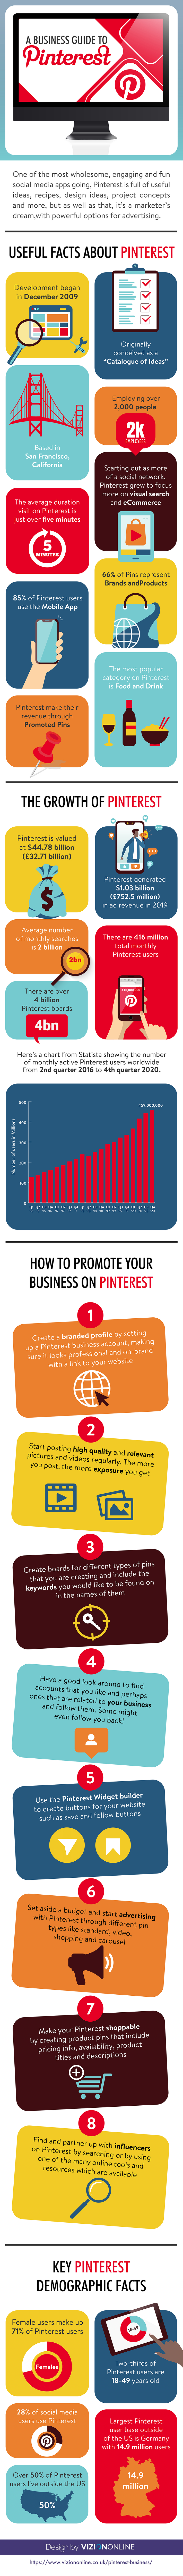 A Business Guide to Pinterest - Infographic